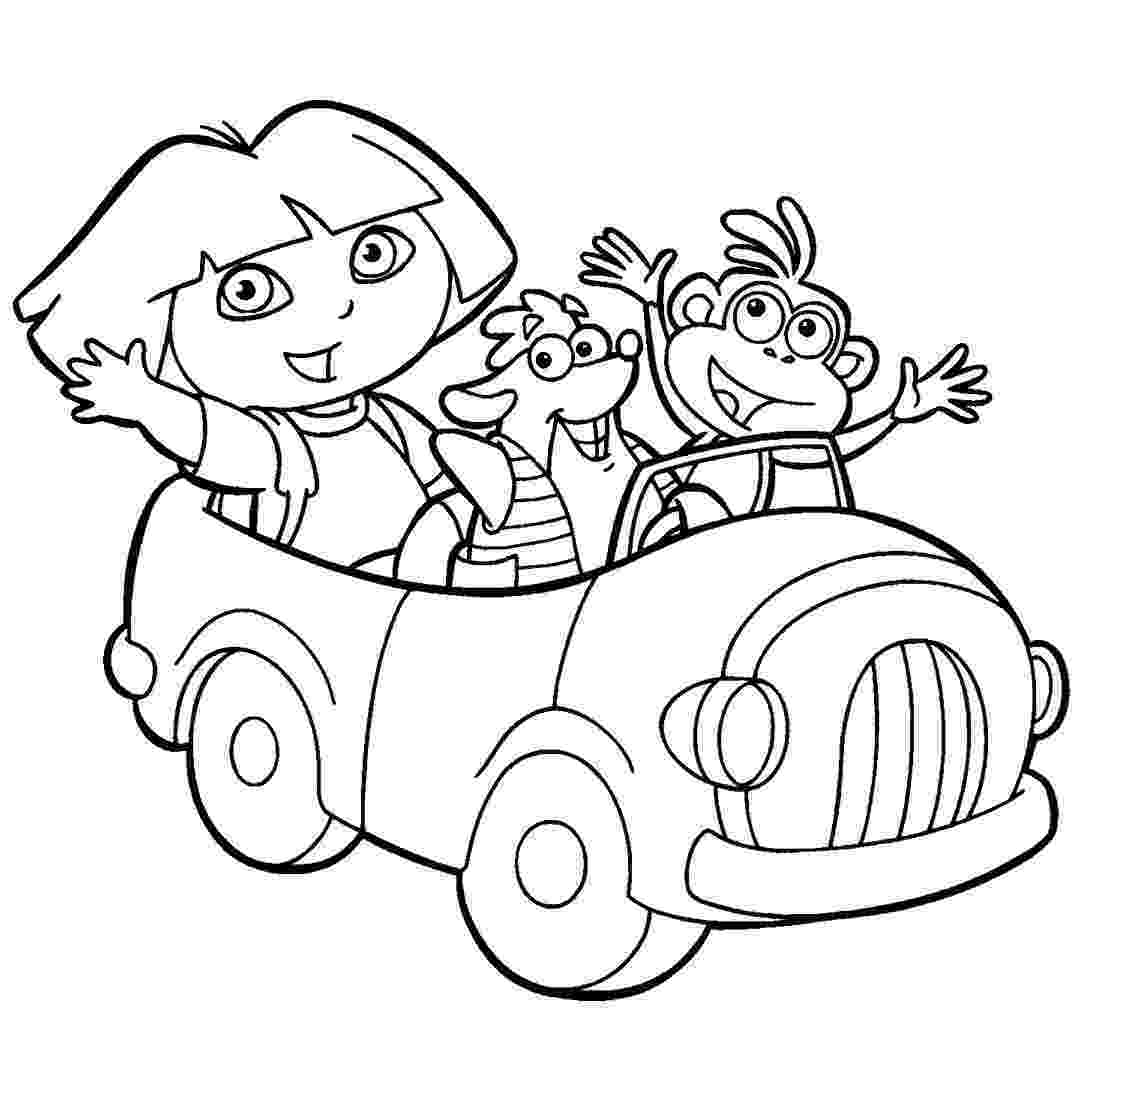 dora explorer coloring pages free printable free dora pictures to print and color dora coloring pages coloring explorer dora printable free 